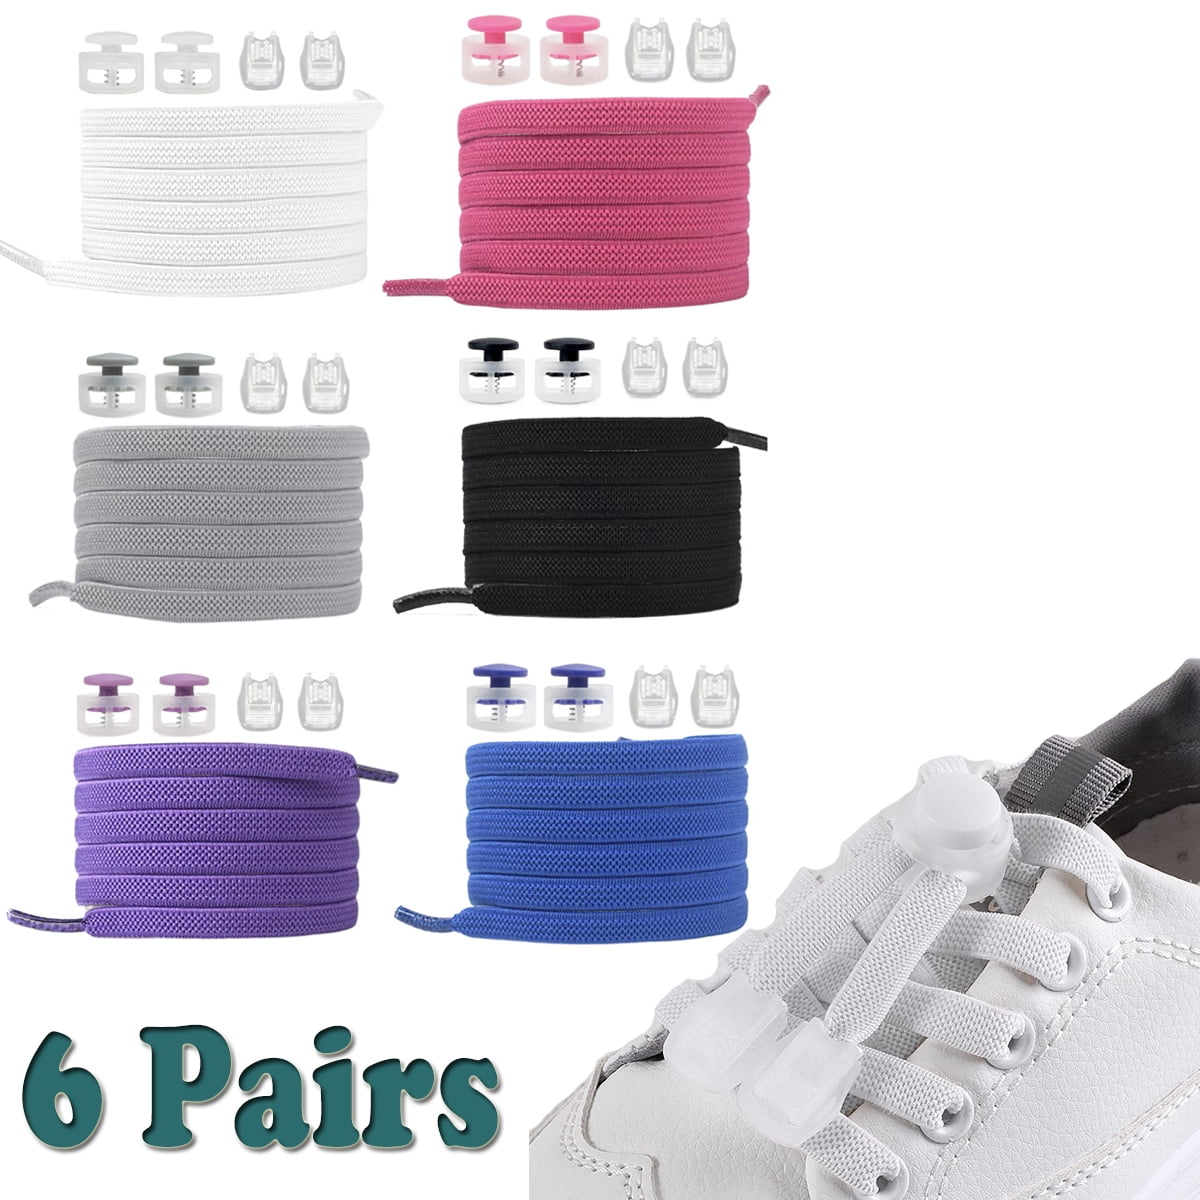 2 Pairs Lazy No Tie Elastic Tieless Flat Lock Laces Shoe Laces Strings for  Kids Adults Running Jogging Athletic Sports